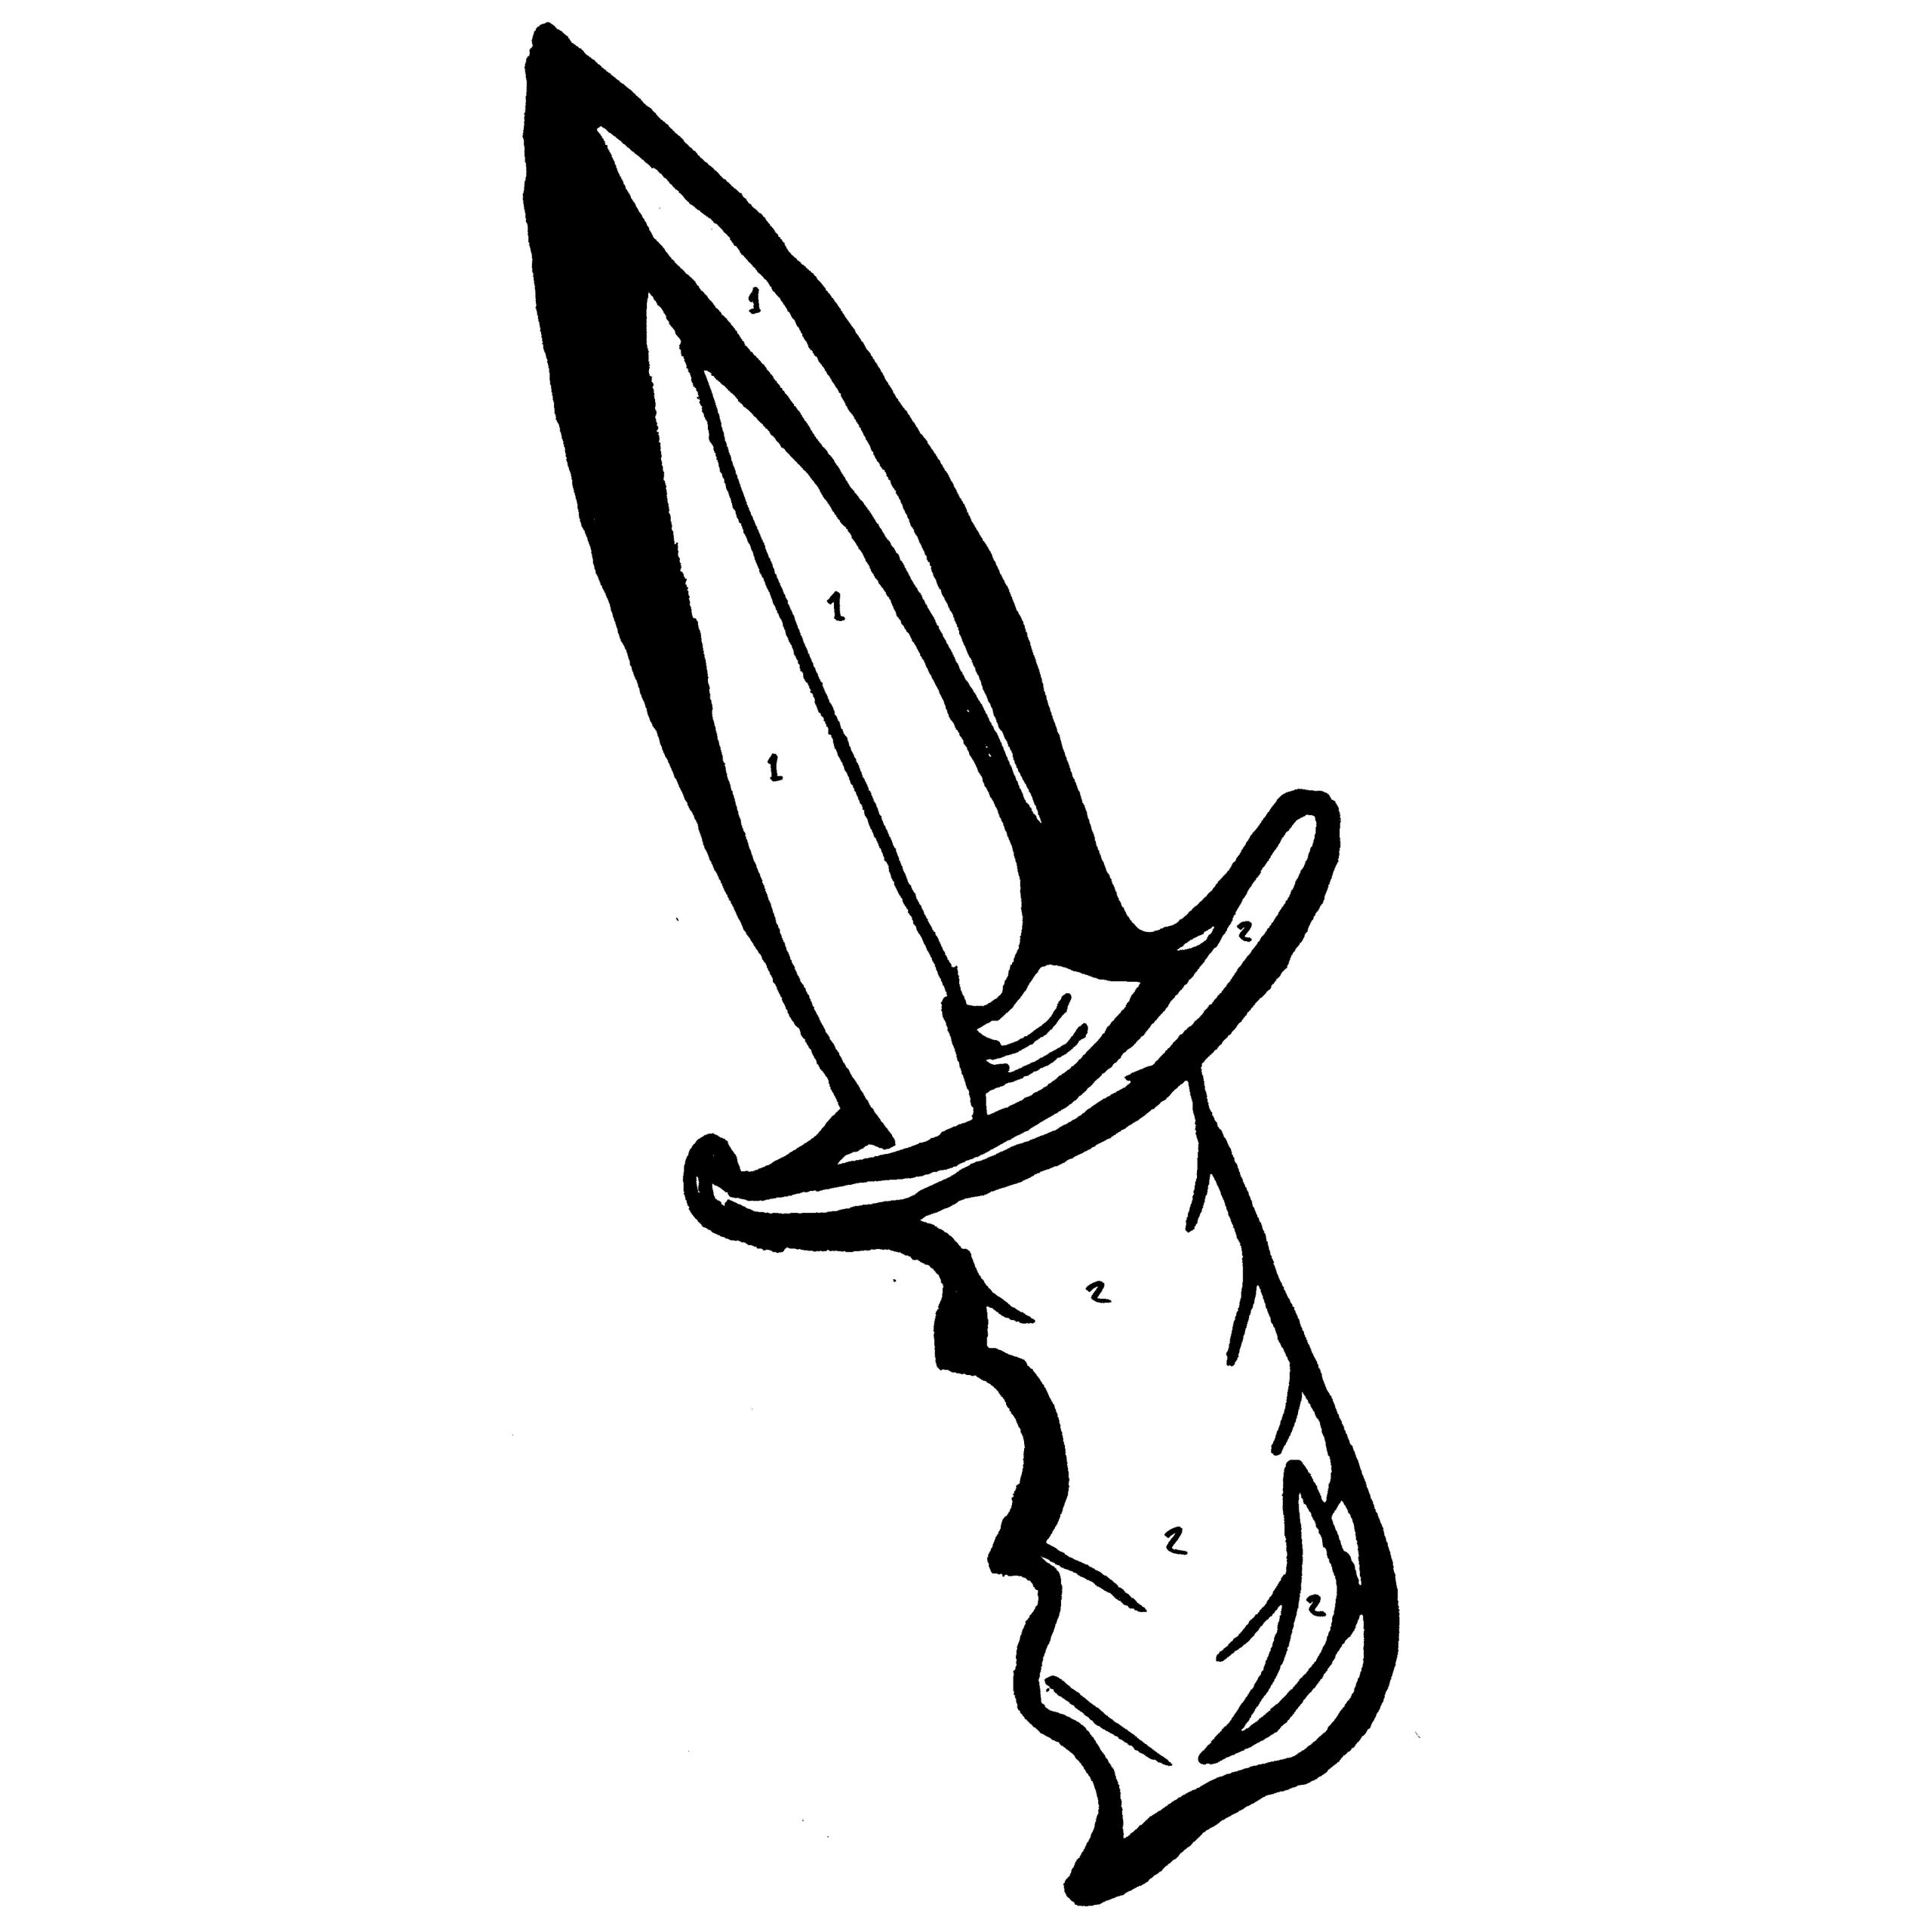 Knife coloring, Download Knife coloring for free 2019